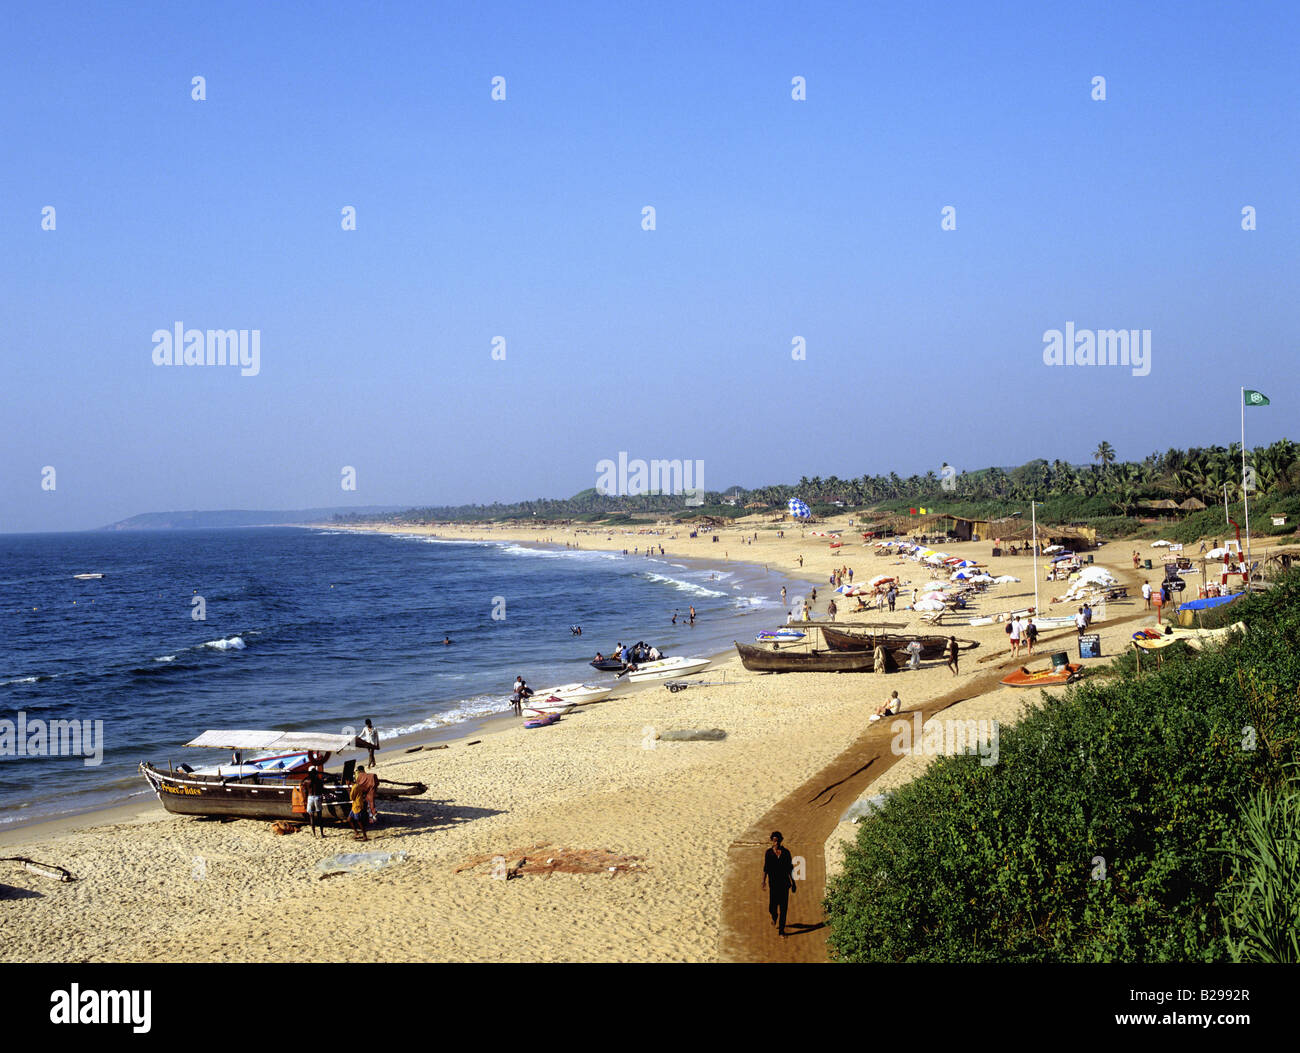 Fort Aguada Beach Goa State India Date 15 06 2008 Ref ZB548 115573 0092 COMPULSORY CREDIT World Pictures Photoshot Stock Photo